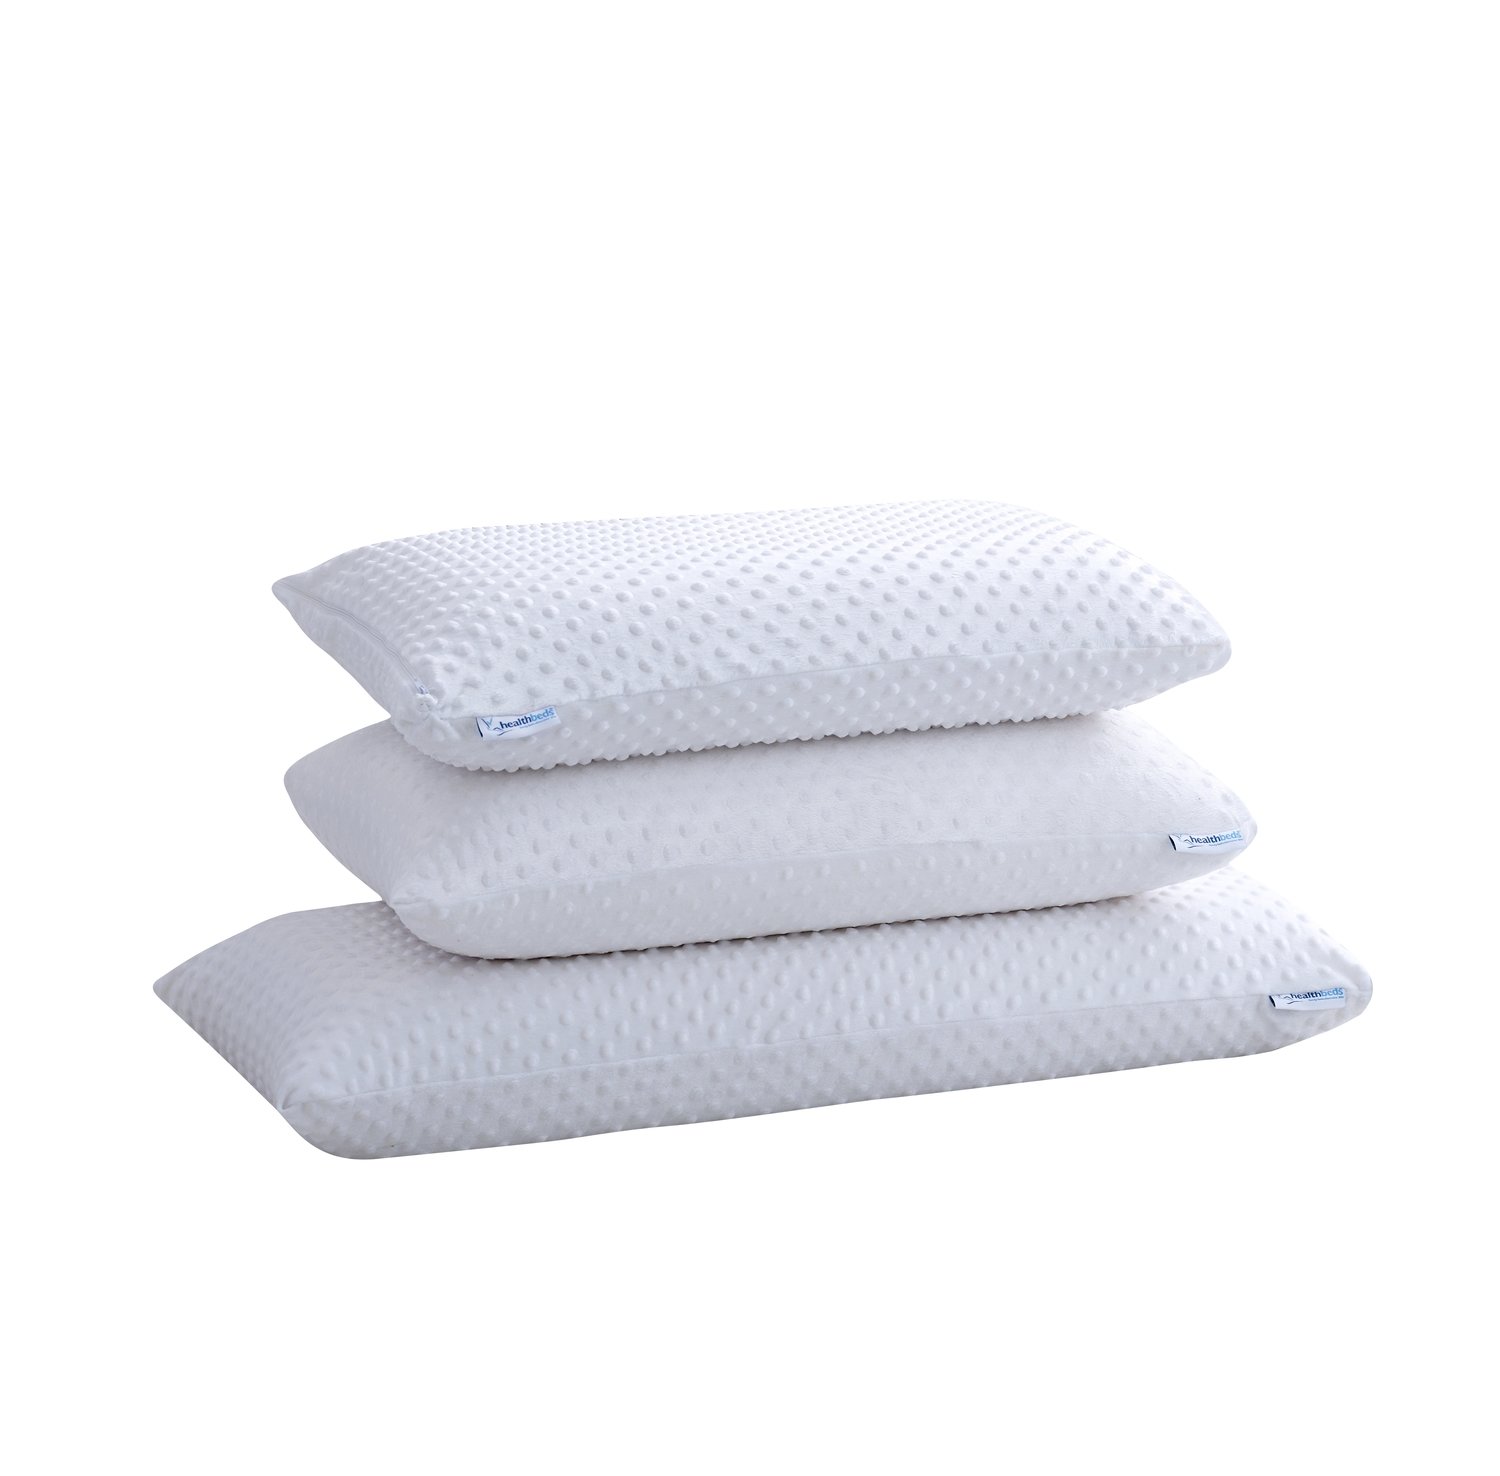 Trio stack of Cooltex Pillows